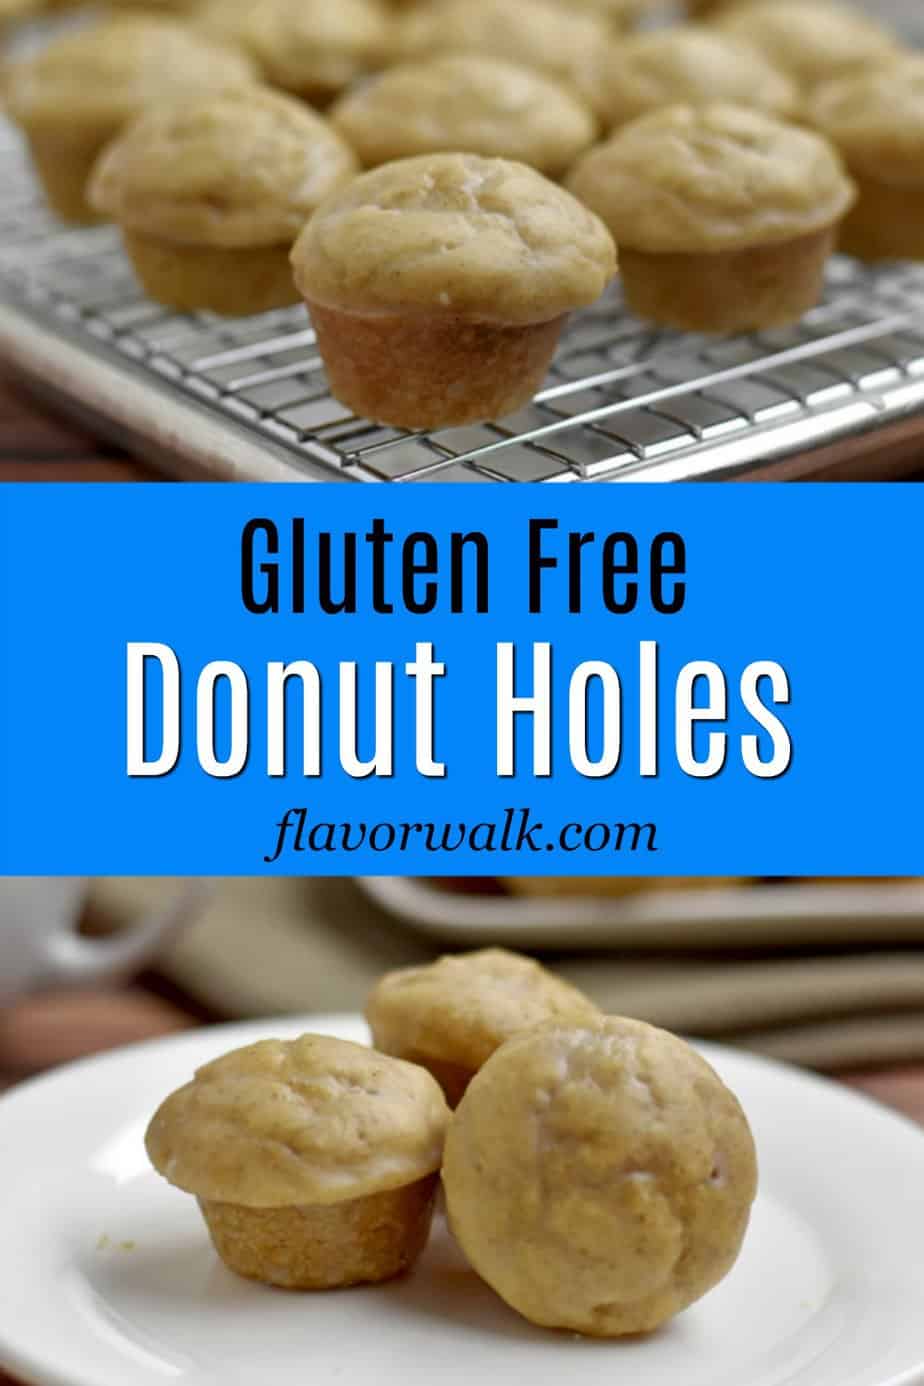 Top image is gluten free donut holes on a wire rack, middle image is blue text ovelay, bottom image is three gluten free donut holes on a white plate with additional donut holes in the background,